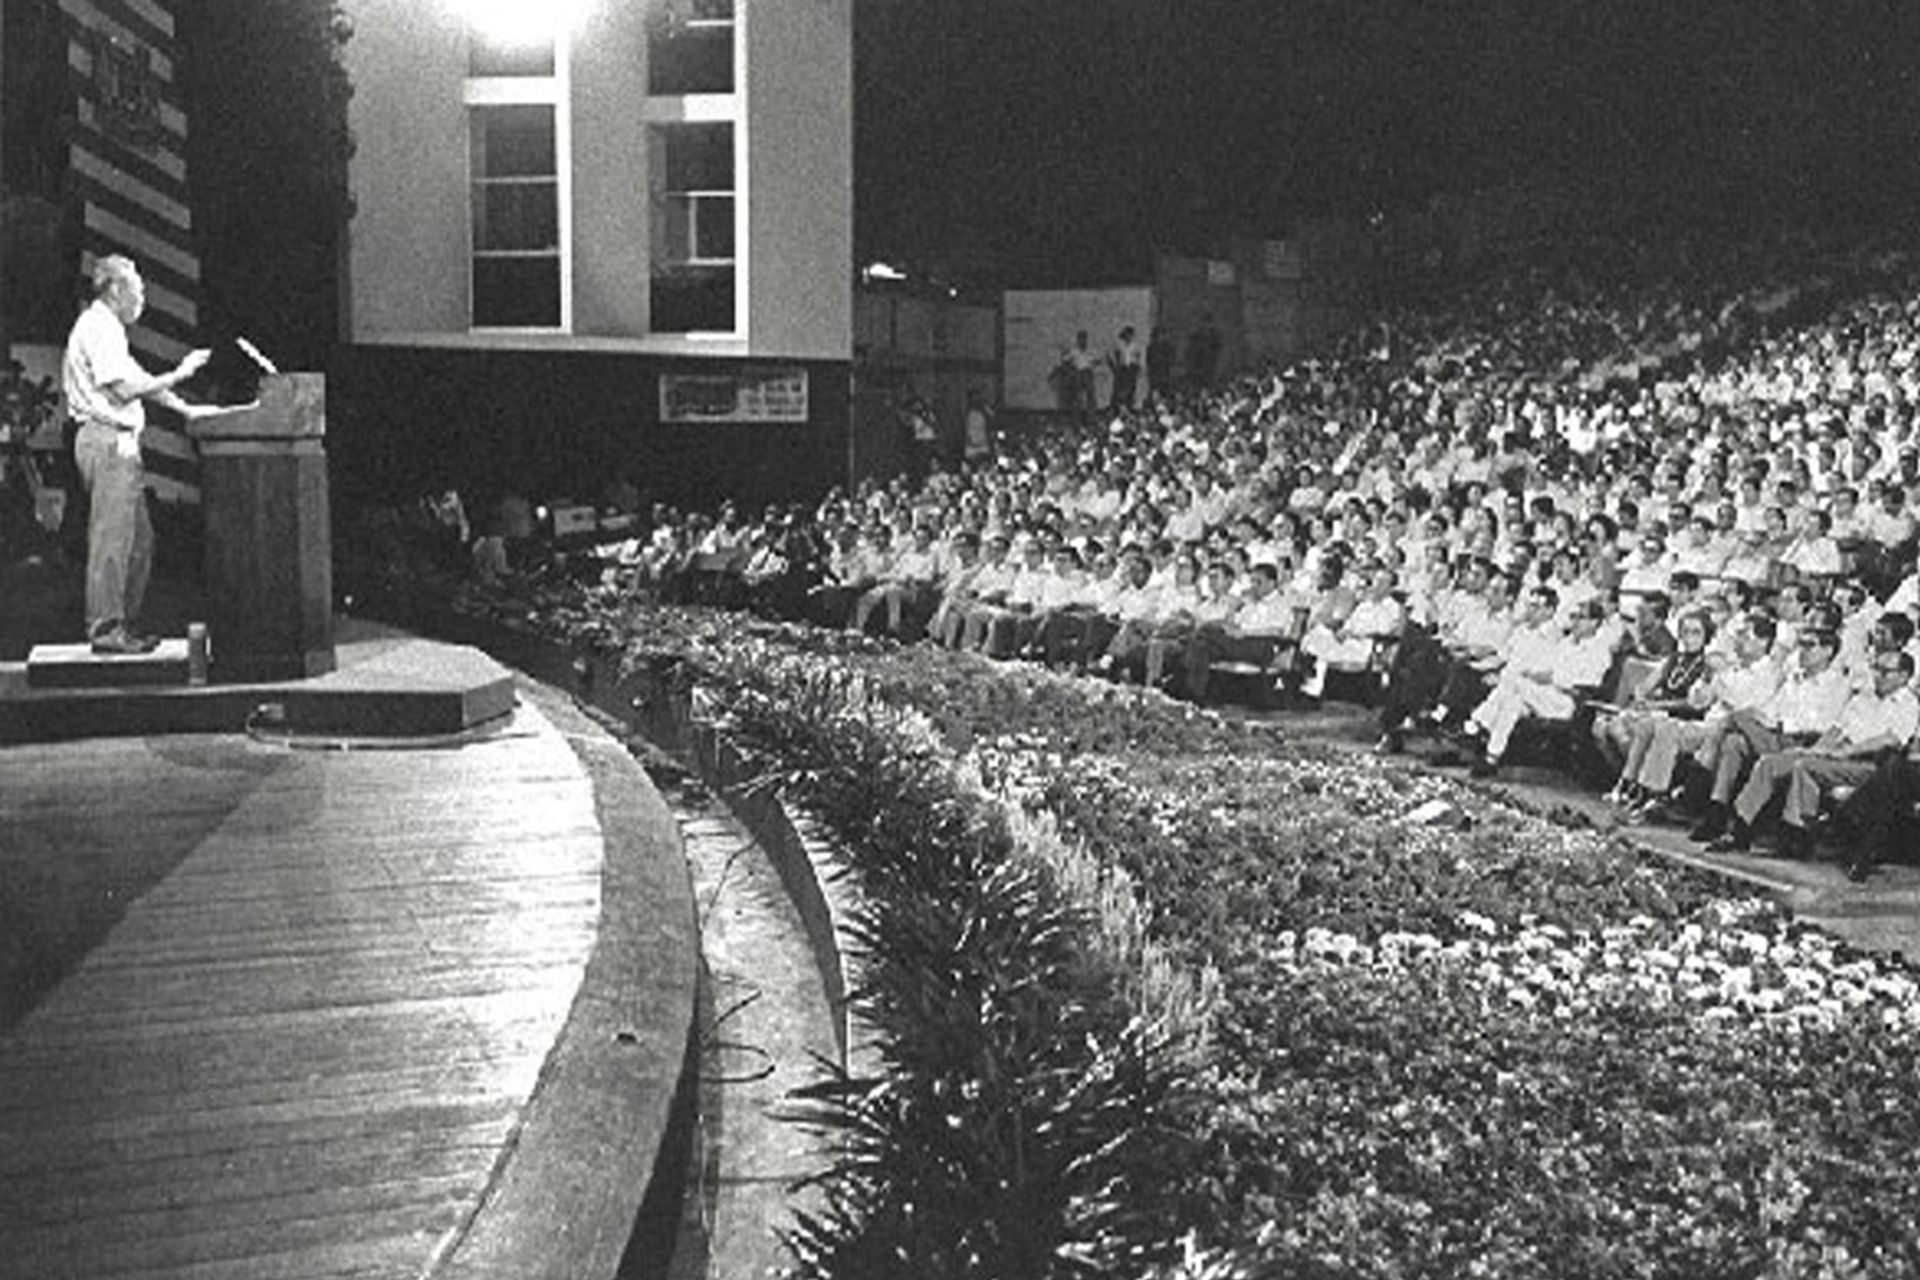 Mr Lee giving his annual National Day Rally speech at the National Theatre at Fort Canning Park on Aug 1, 1983. The rally, an occasion for the Prime Minister to spell out his policies once a year, was televised live and broadcast on all radio and television channels. Source: MCI Collection